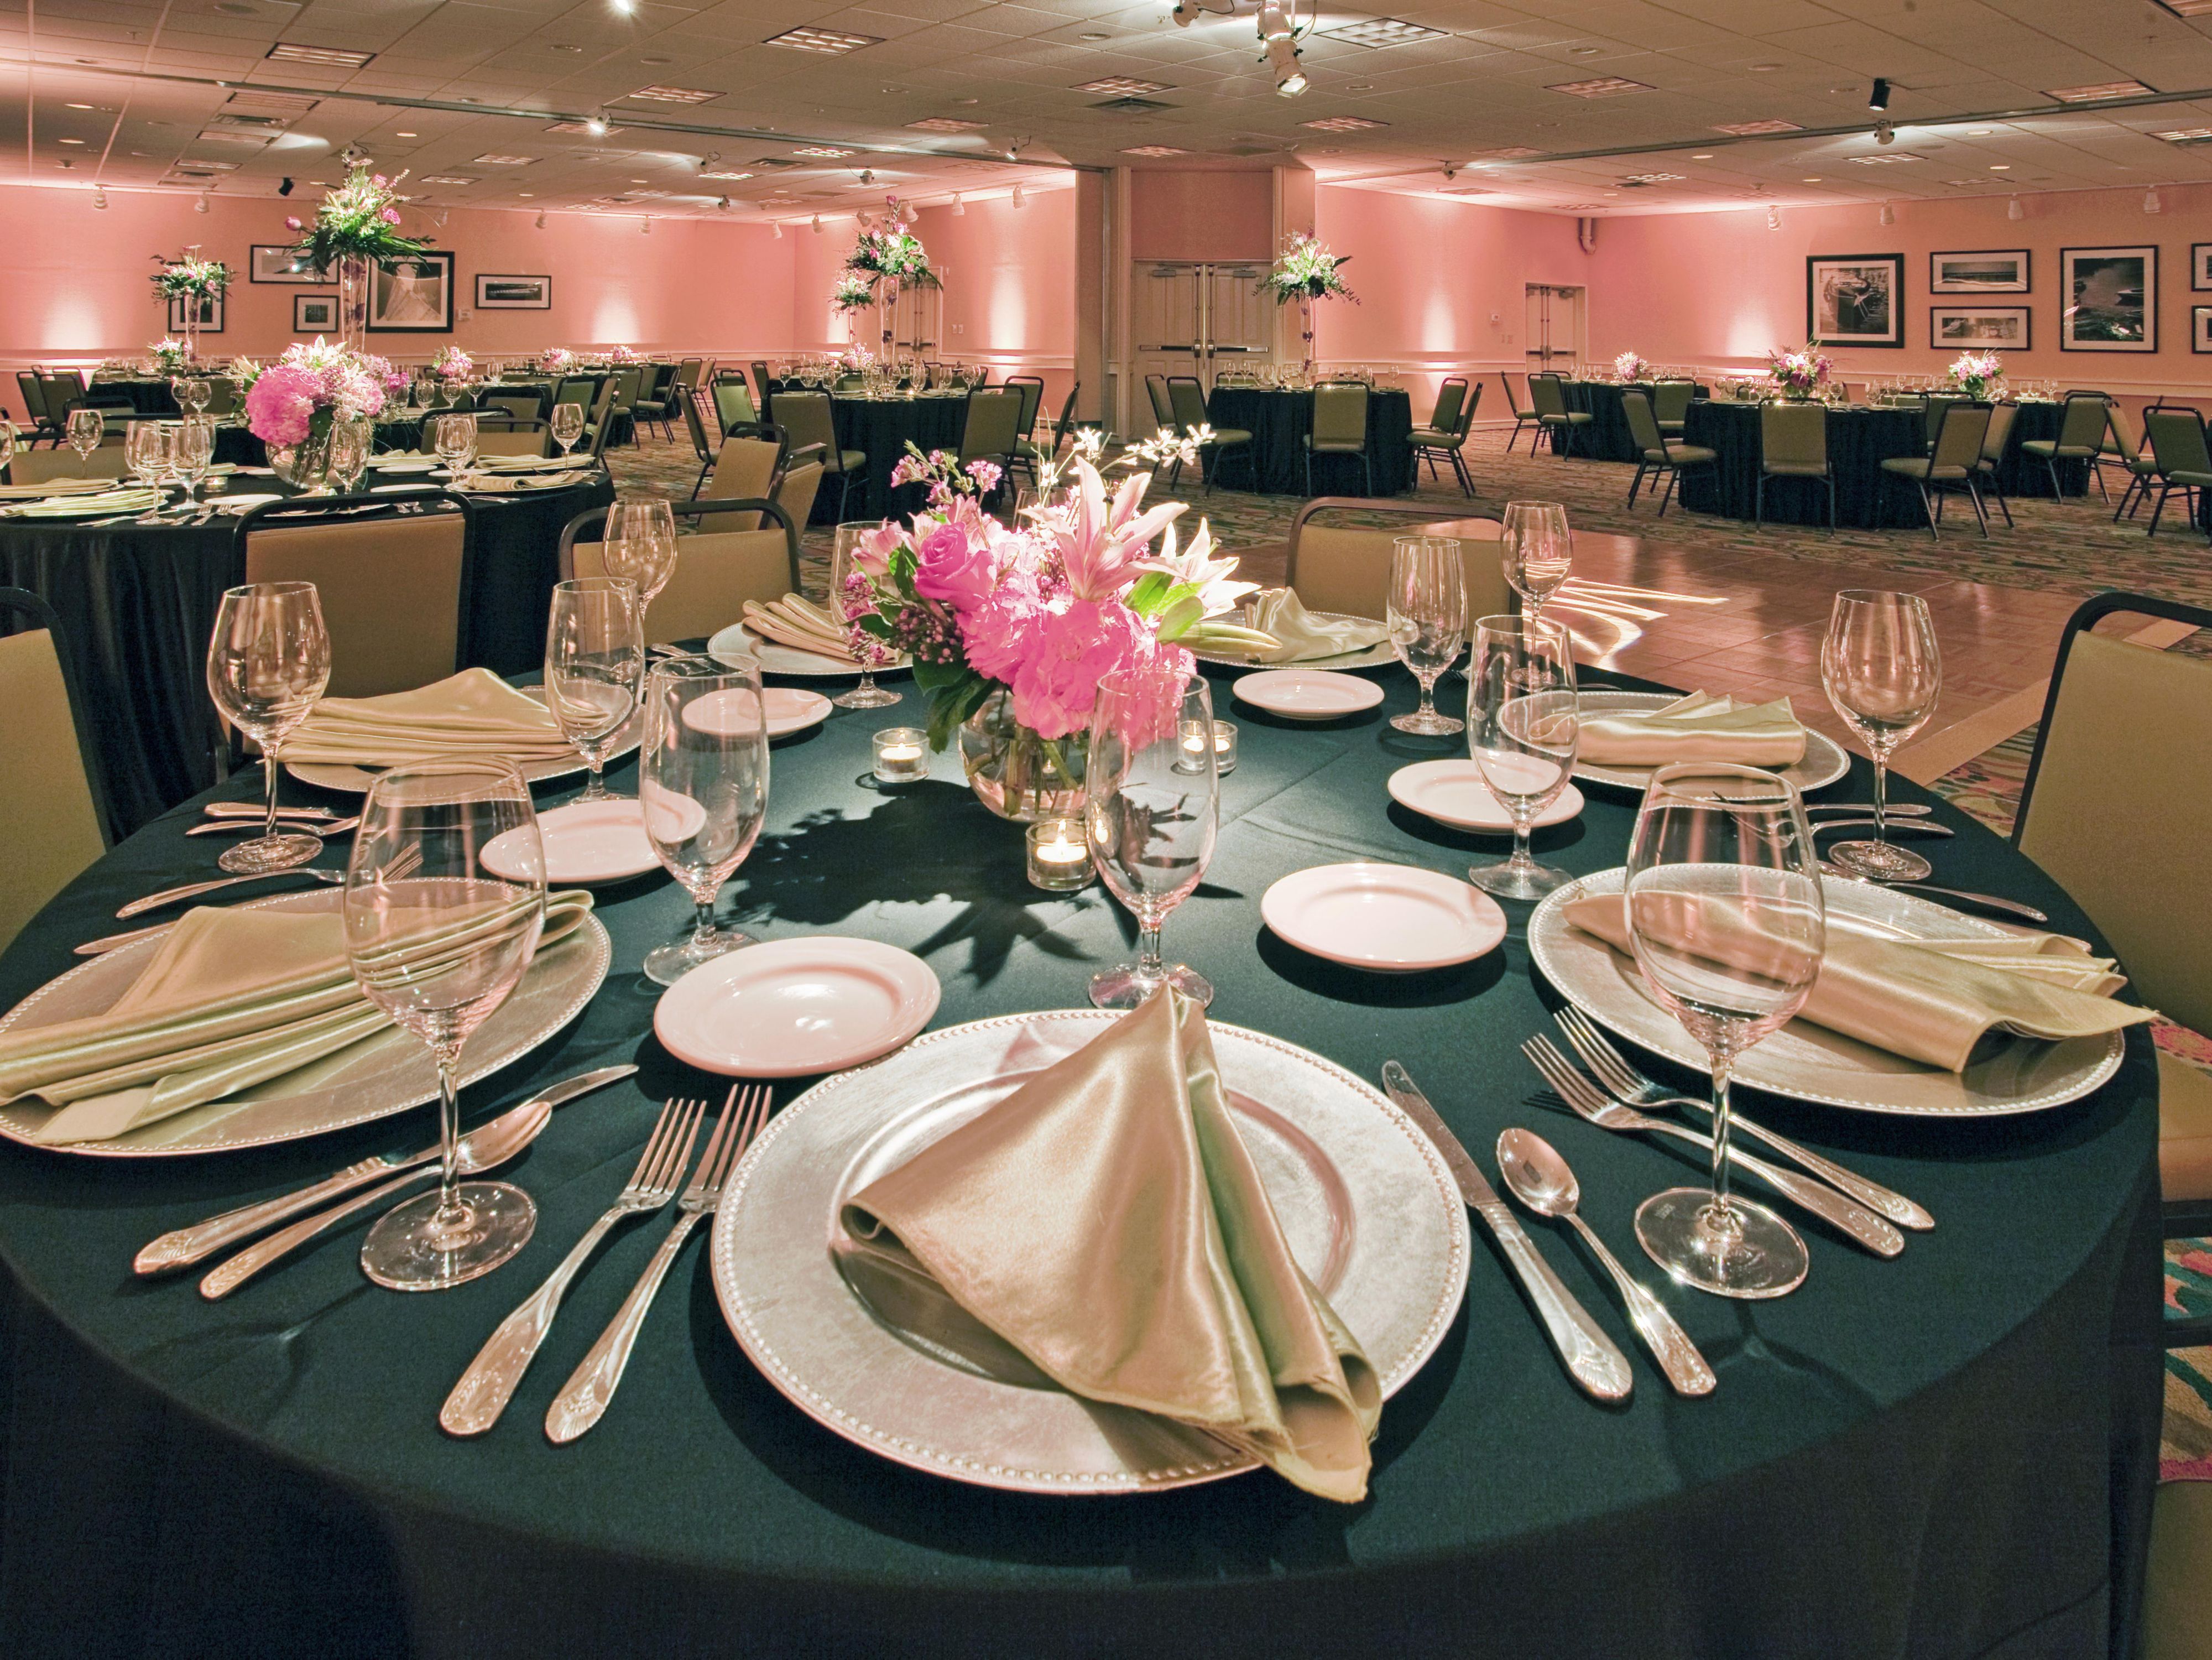 Schedule your event at this amazing Virginia Beach hotel! Planning an intimate event or a grand meeting, private dinner to a casual beach party, our inspired staff goes to great lengths to create the memorable events you envision delivered with our unparalleled service.